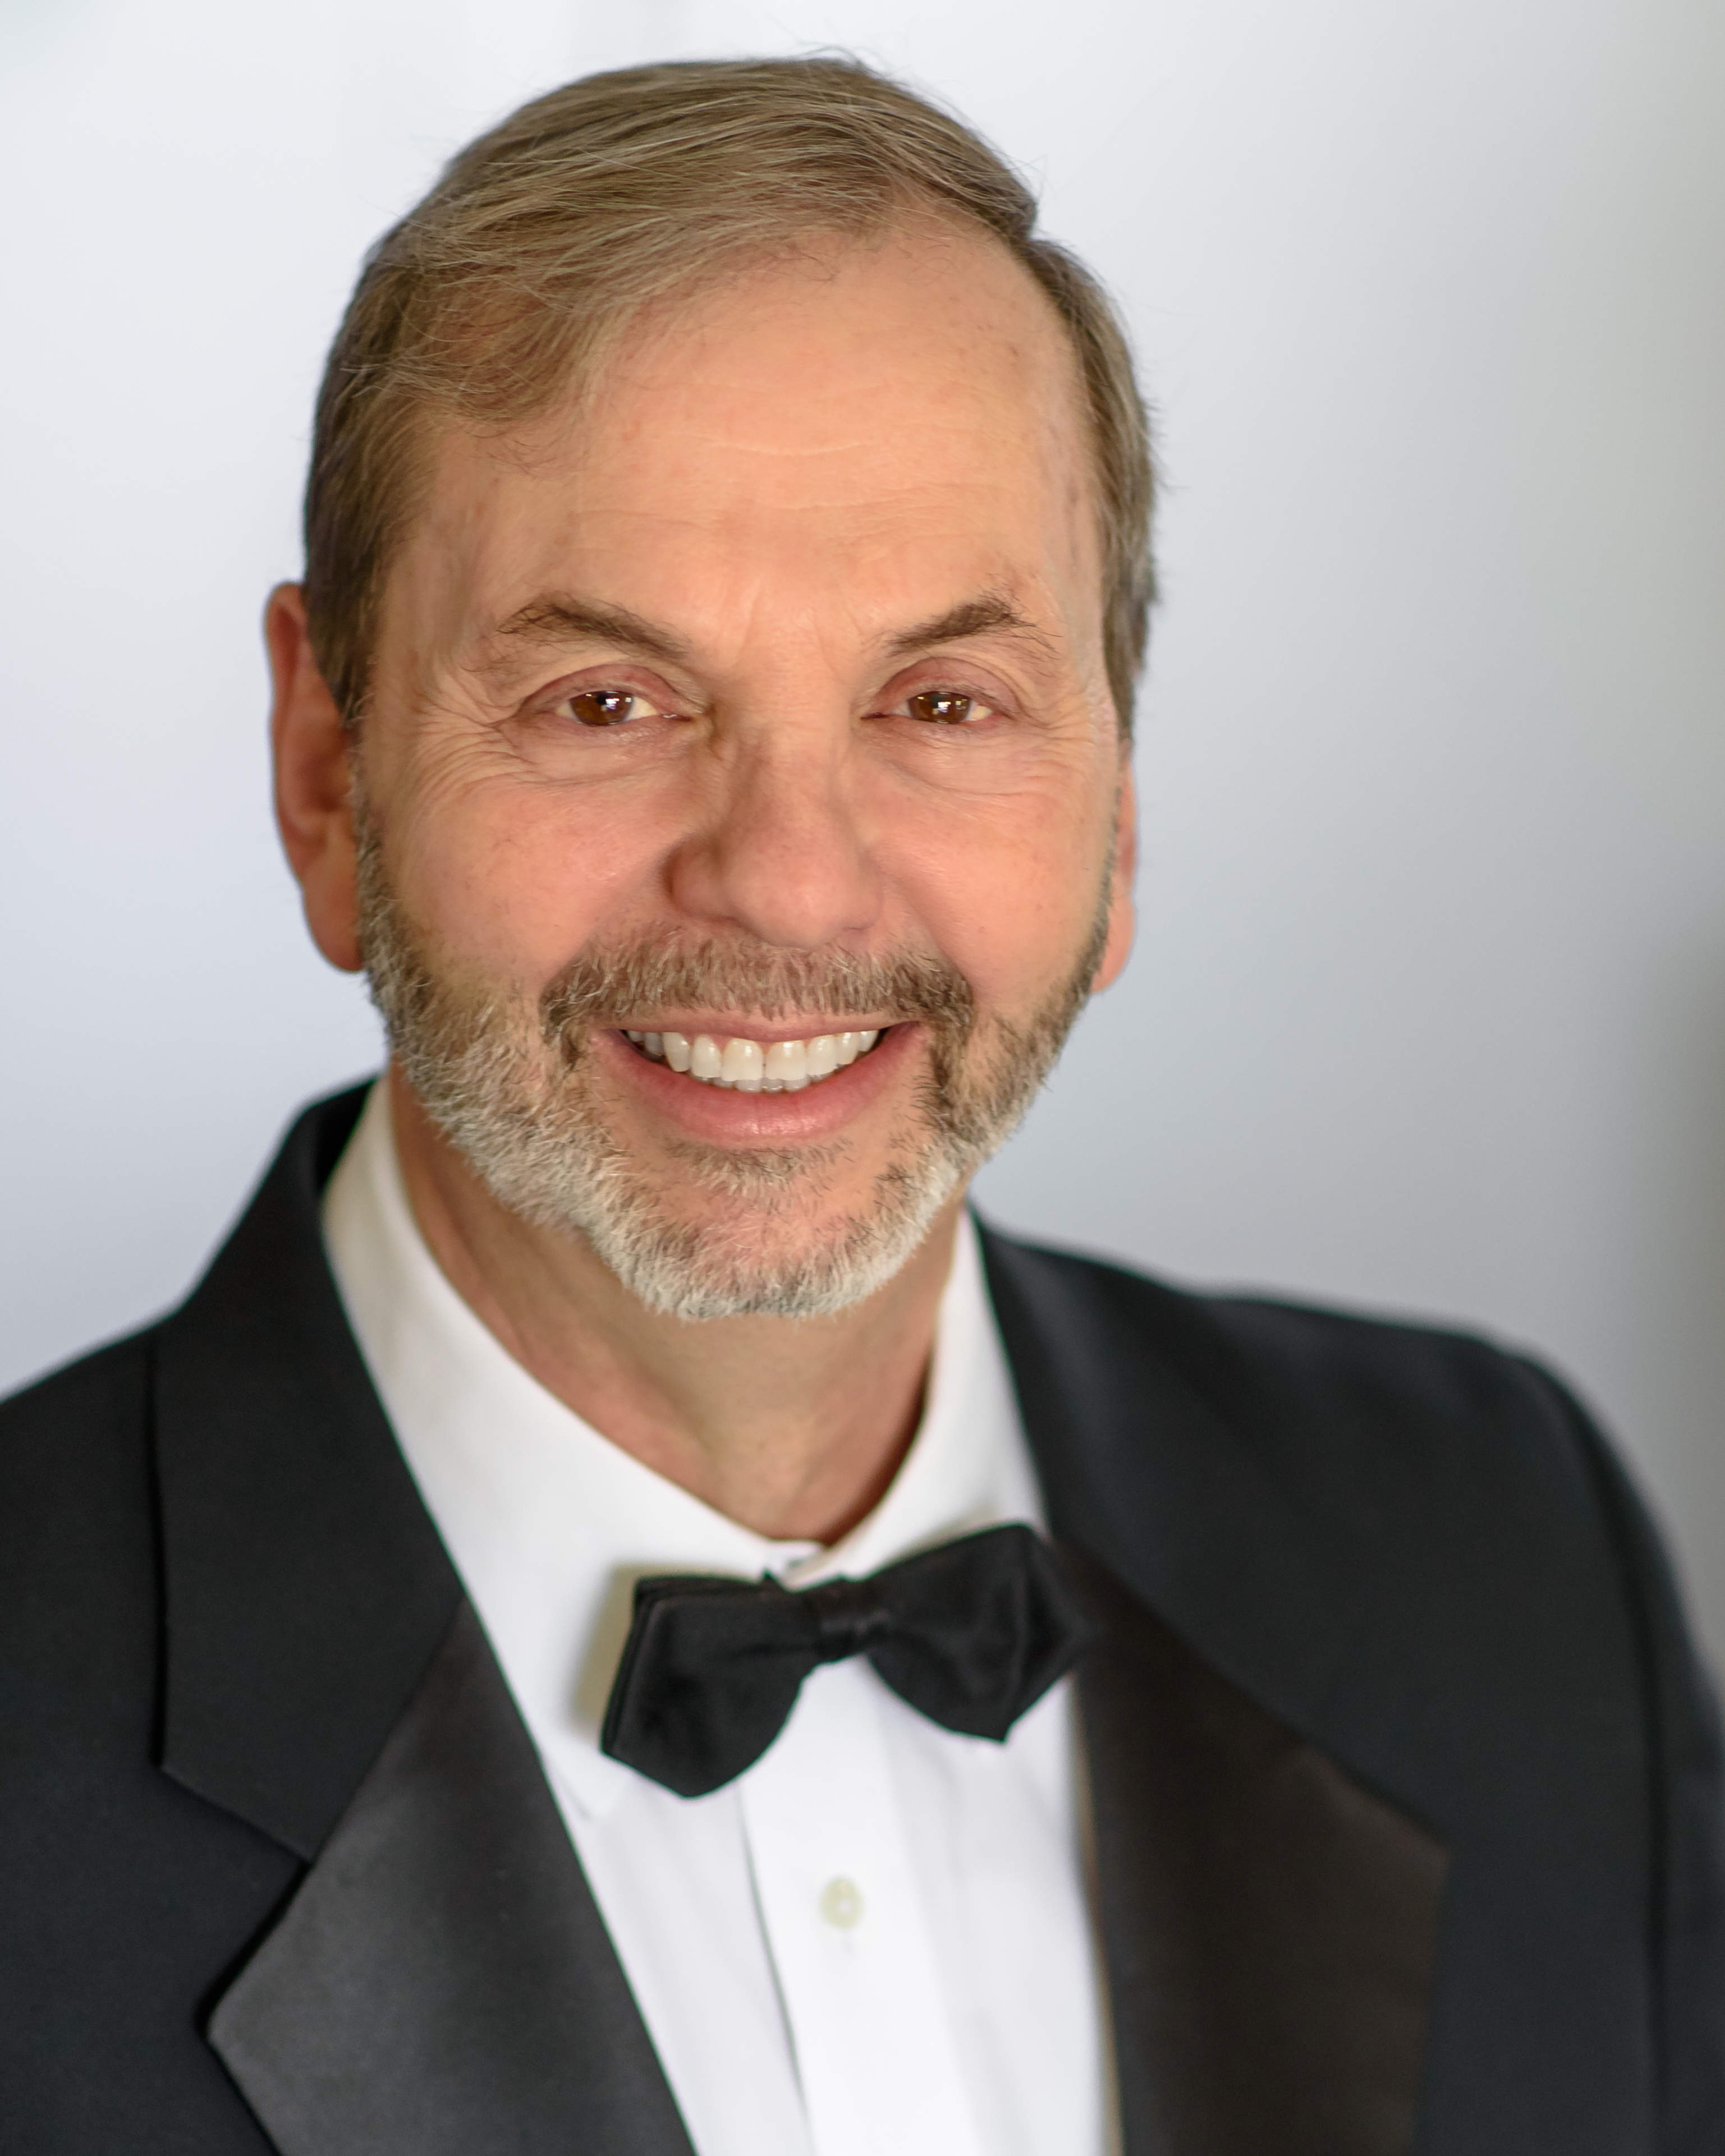 Headshot of Conductor Lou Kosma smiling, wearing a tuxedo and bow tie.